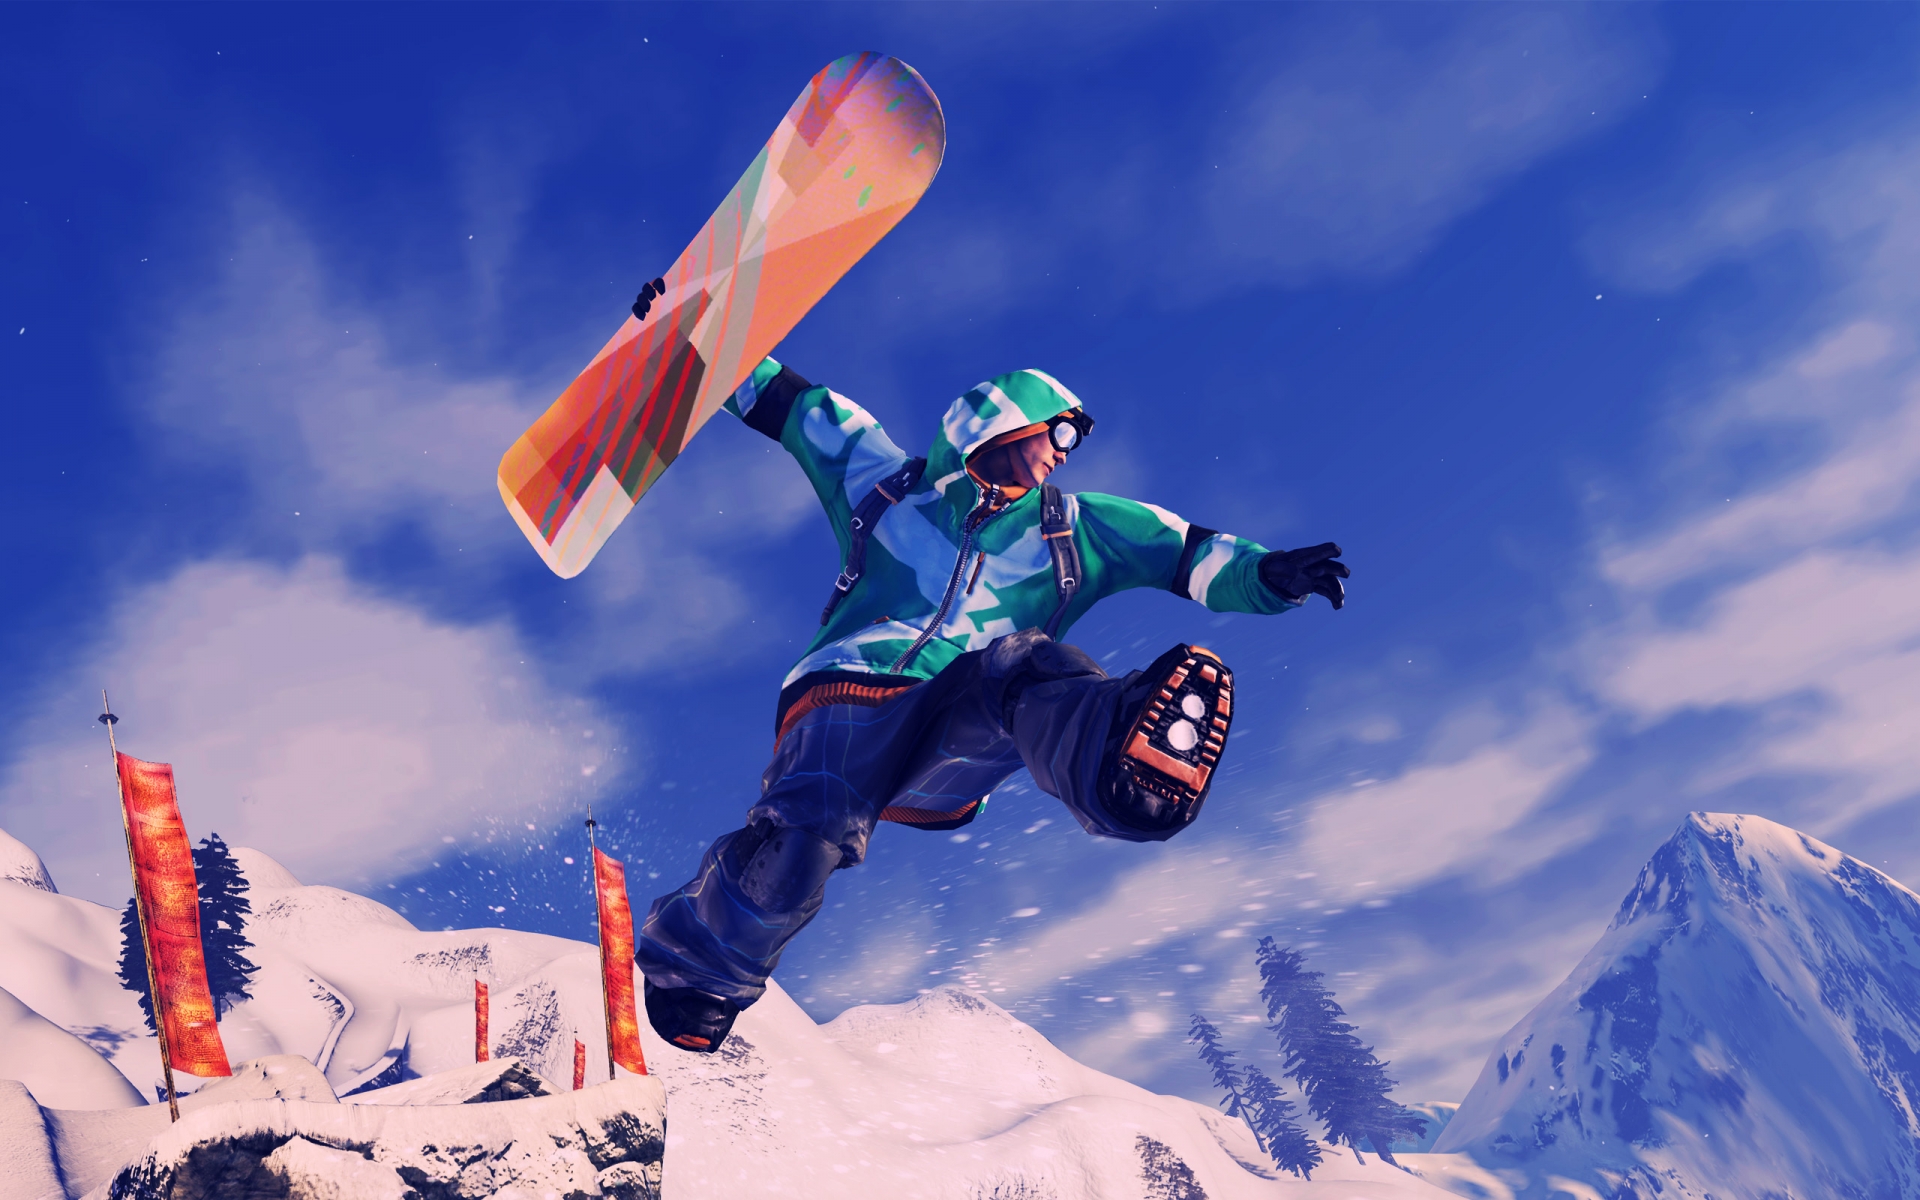 Wallpapers Snowboarding Ssx For X Widescreen Hd Wide 1920x1200 ...